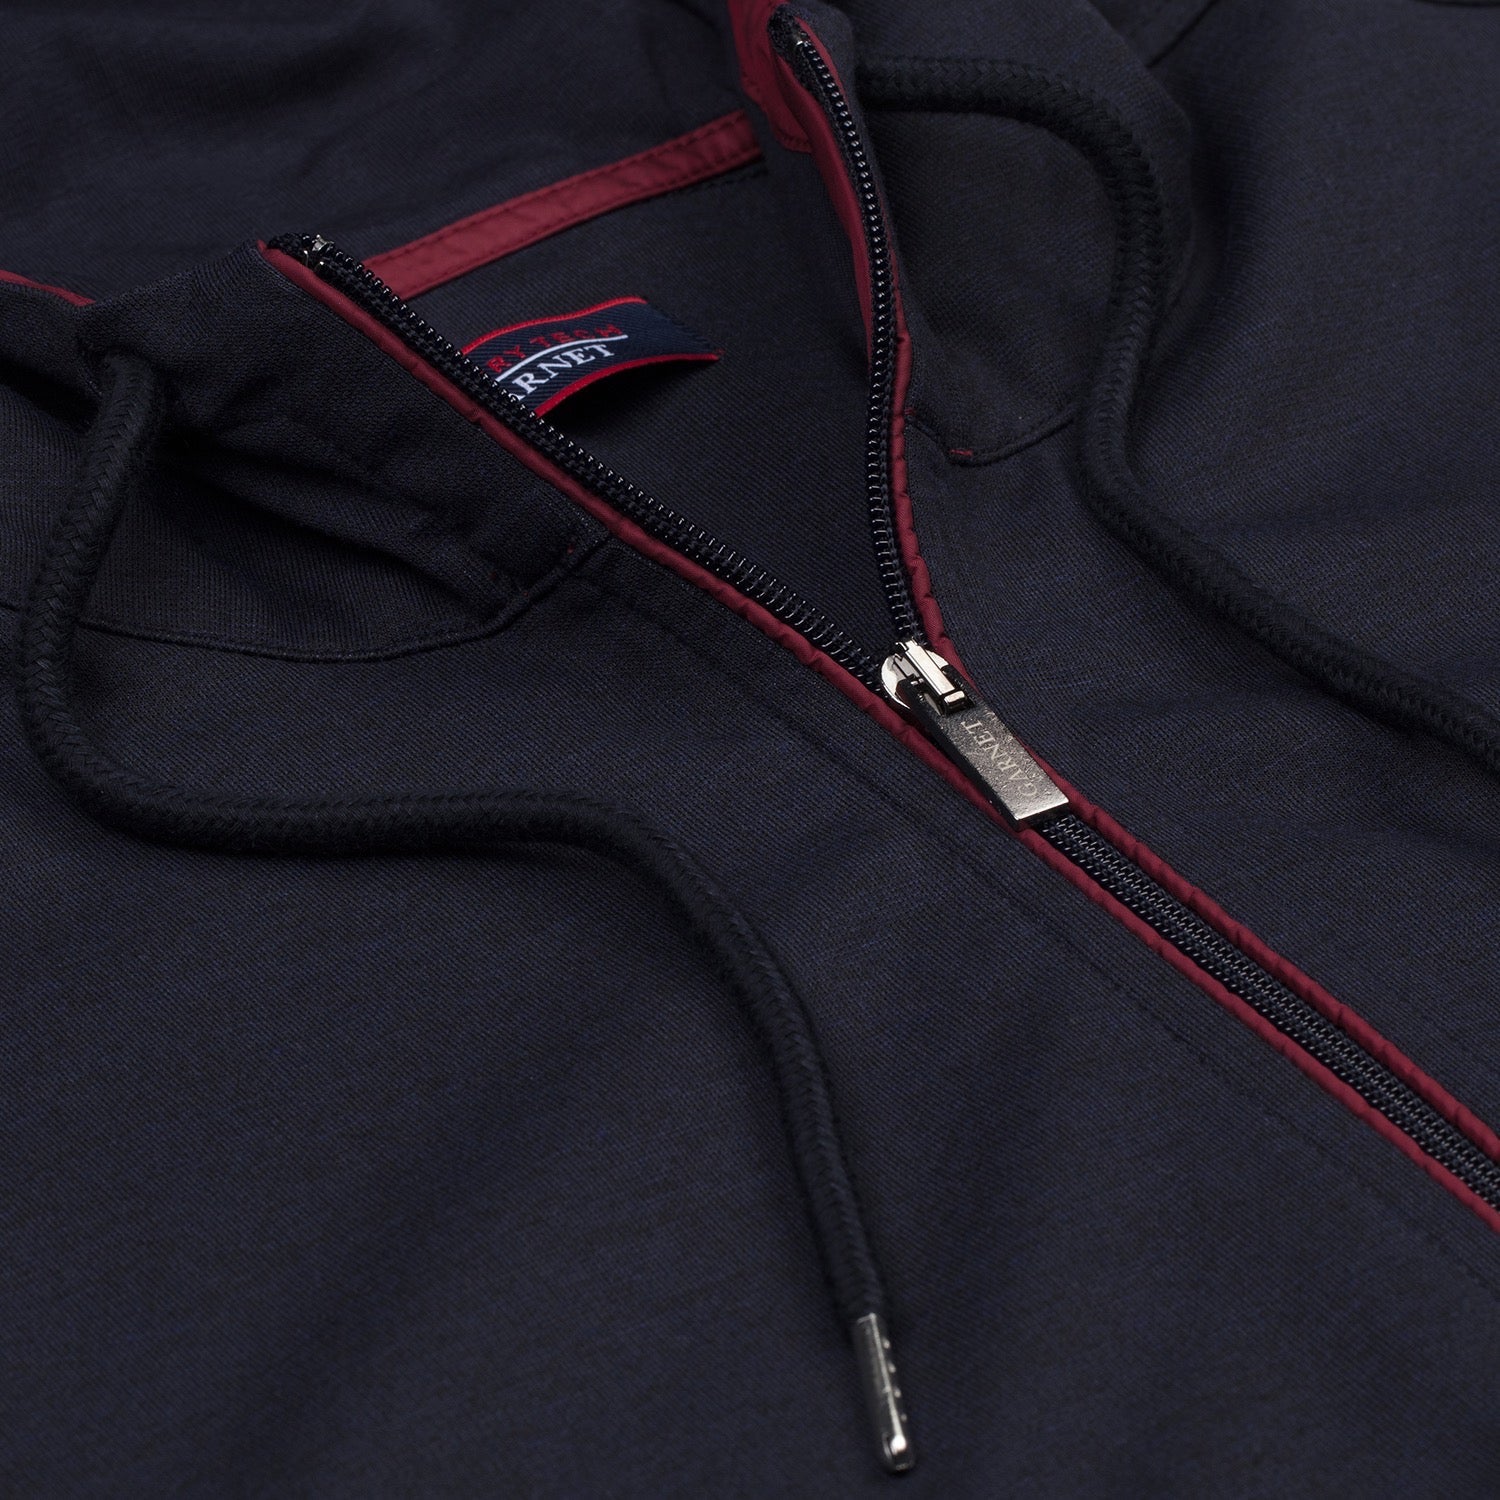 Full Zip Tracksuit Set With Hood in Navy